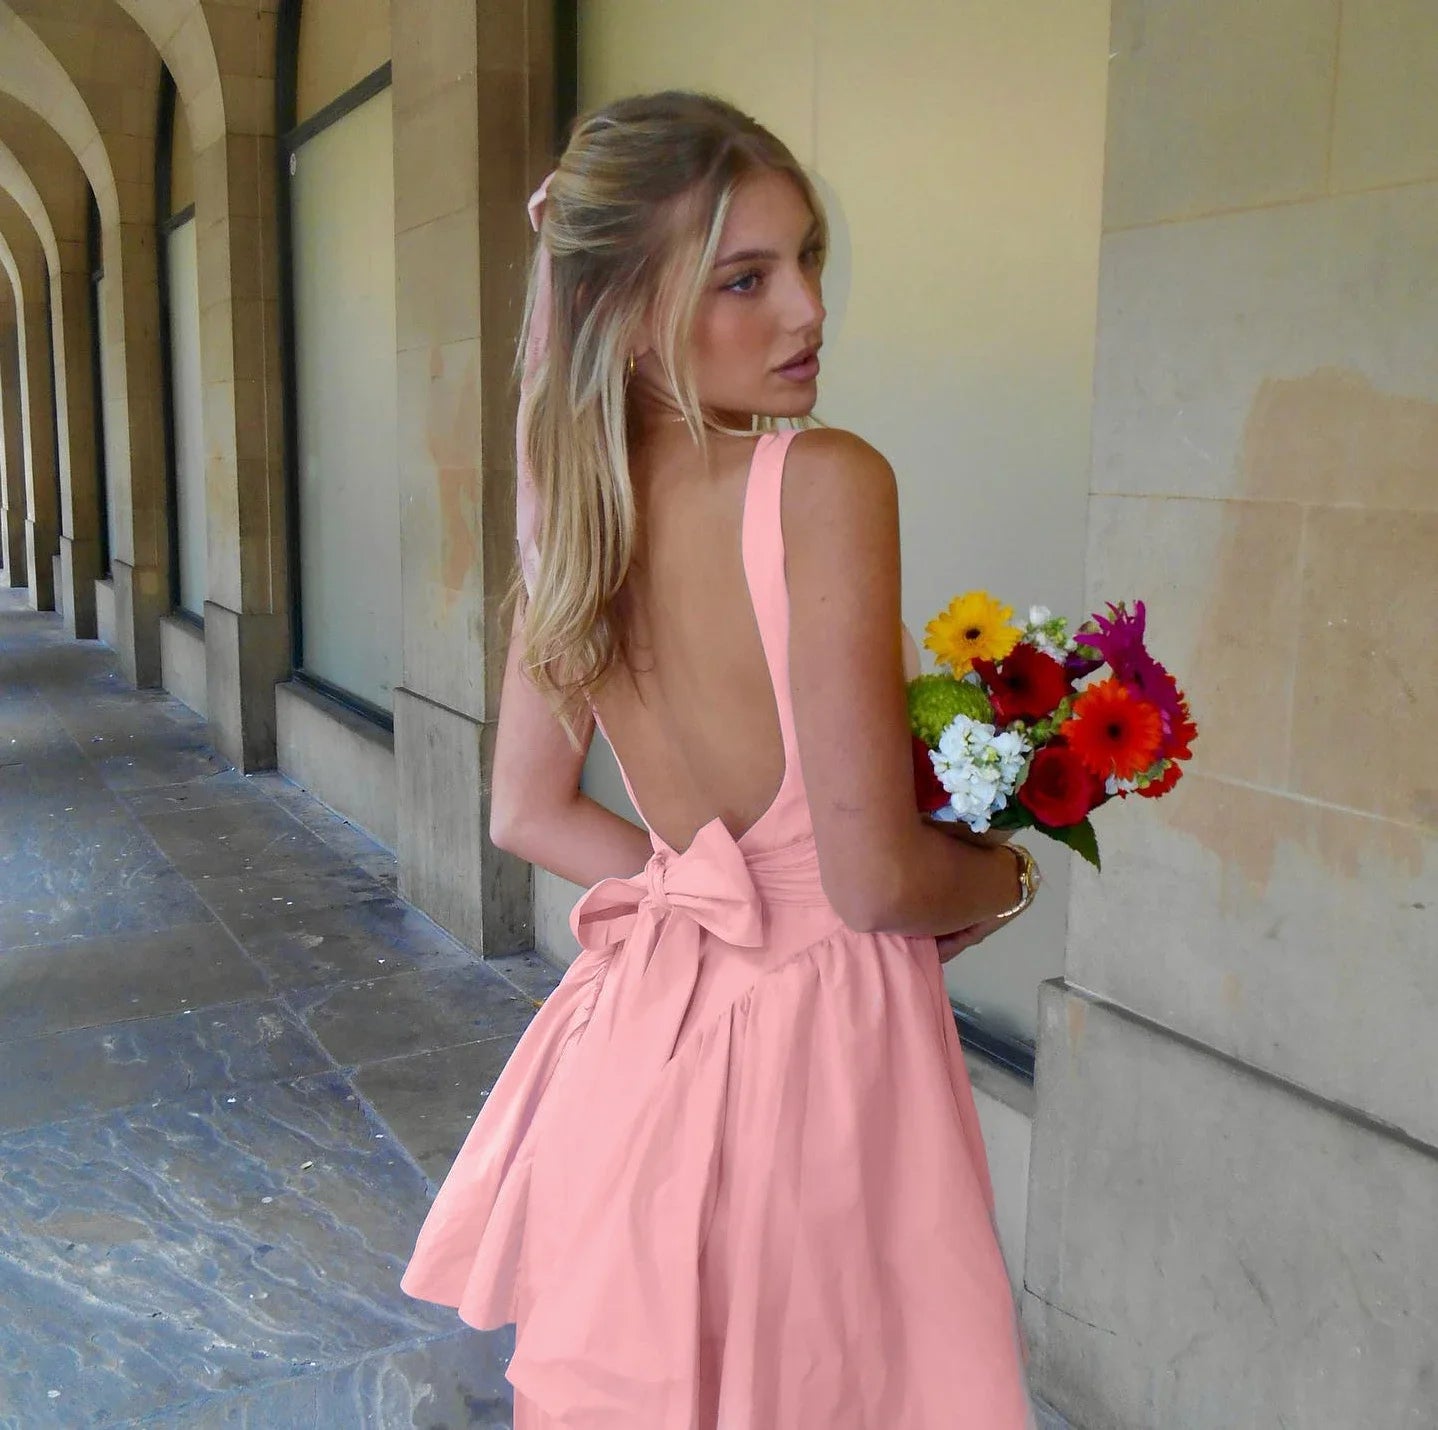 Get ready for your next summer event with our stunning Robe Matilde. This backless A-line dress is made of soft and breathable cotton, perfect for keeping you cool and comfortable on warm days. The big bow adds a touch of elegance, making it a great choice for birthdays and holidays. Don't miss out on this sexy and versatile dress!